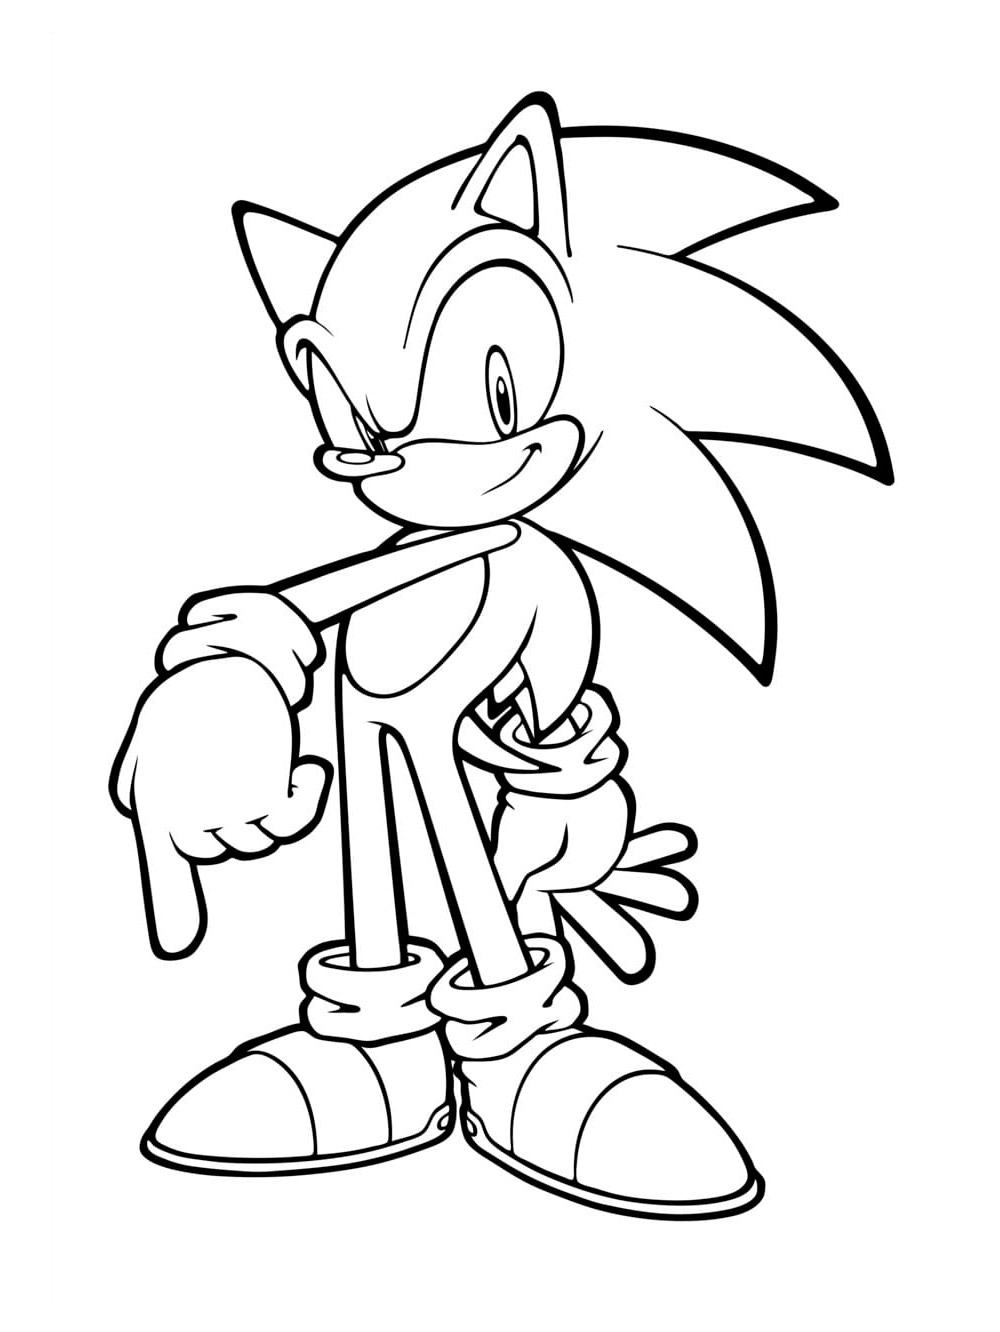 Super Sonic The Hedgehog Coloring Pages Free **2023** - The Daily Coloring